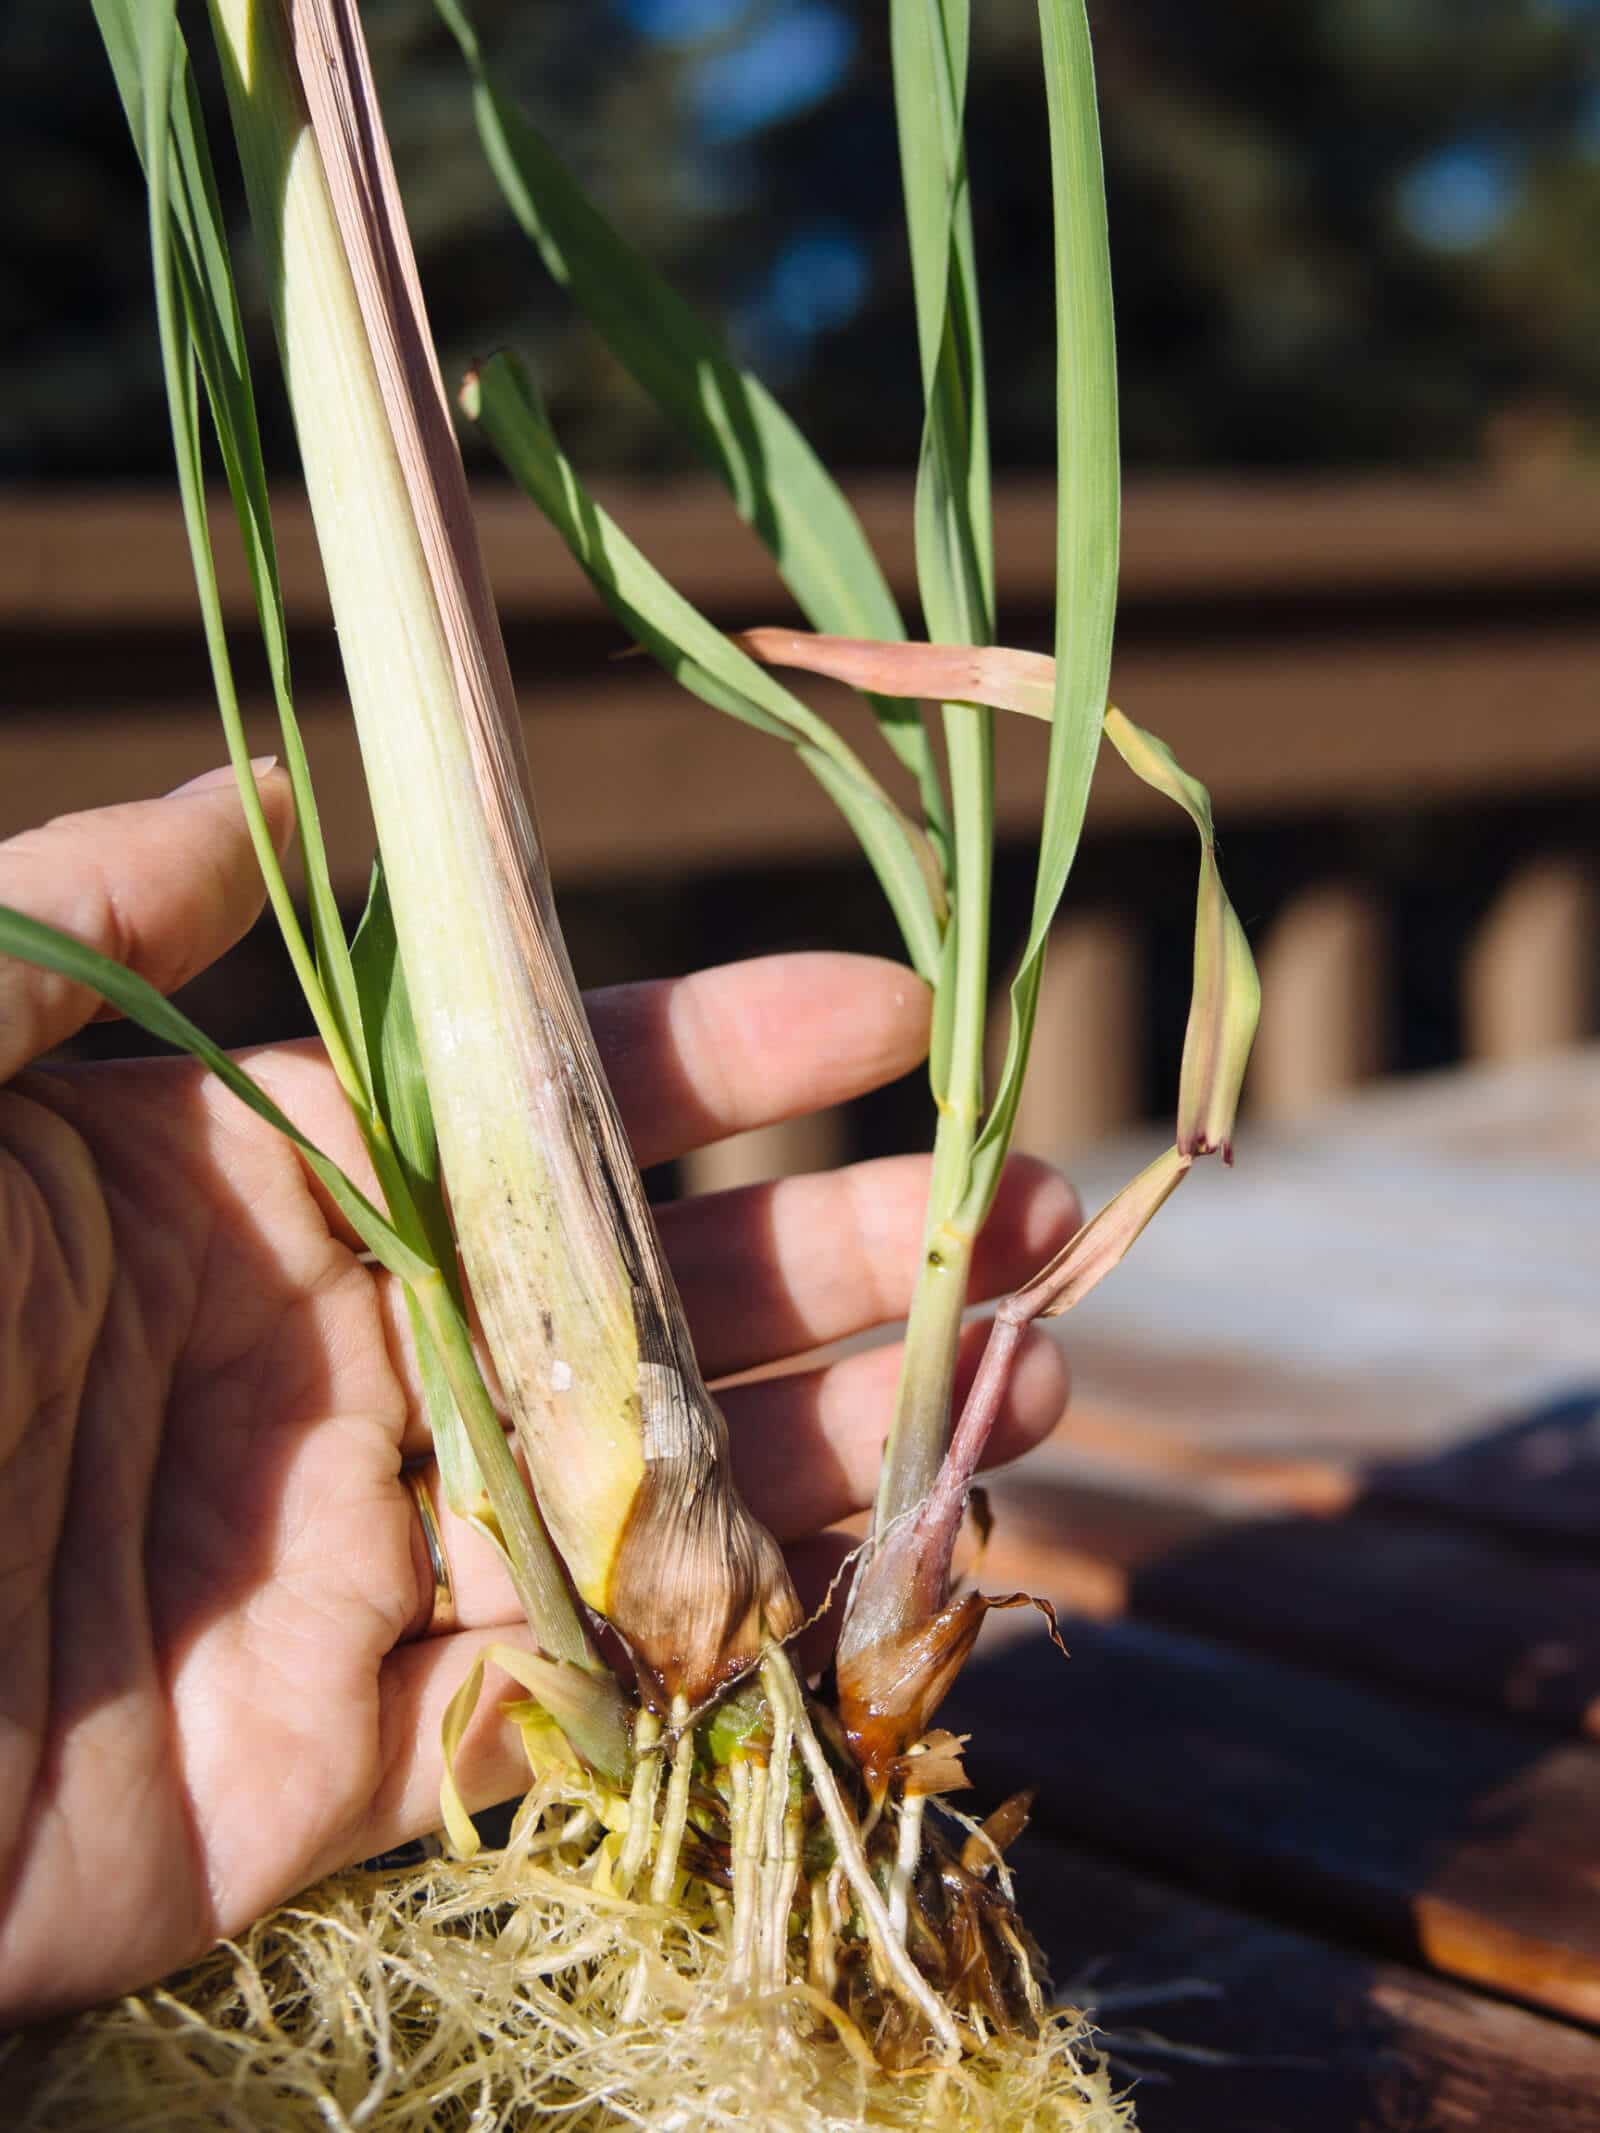 Divide the lemongrass clump by breaking off a stalk with the roots intact